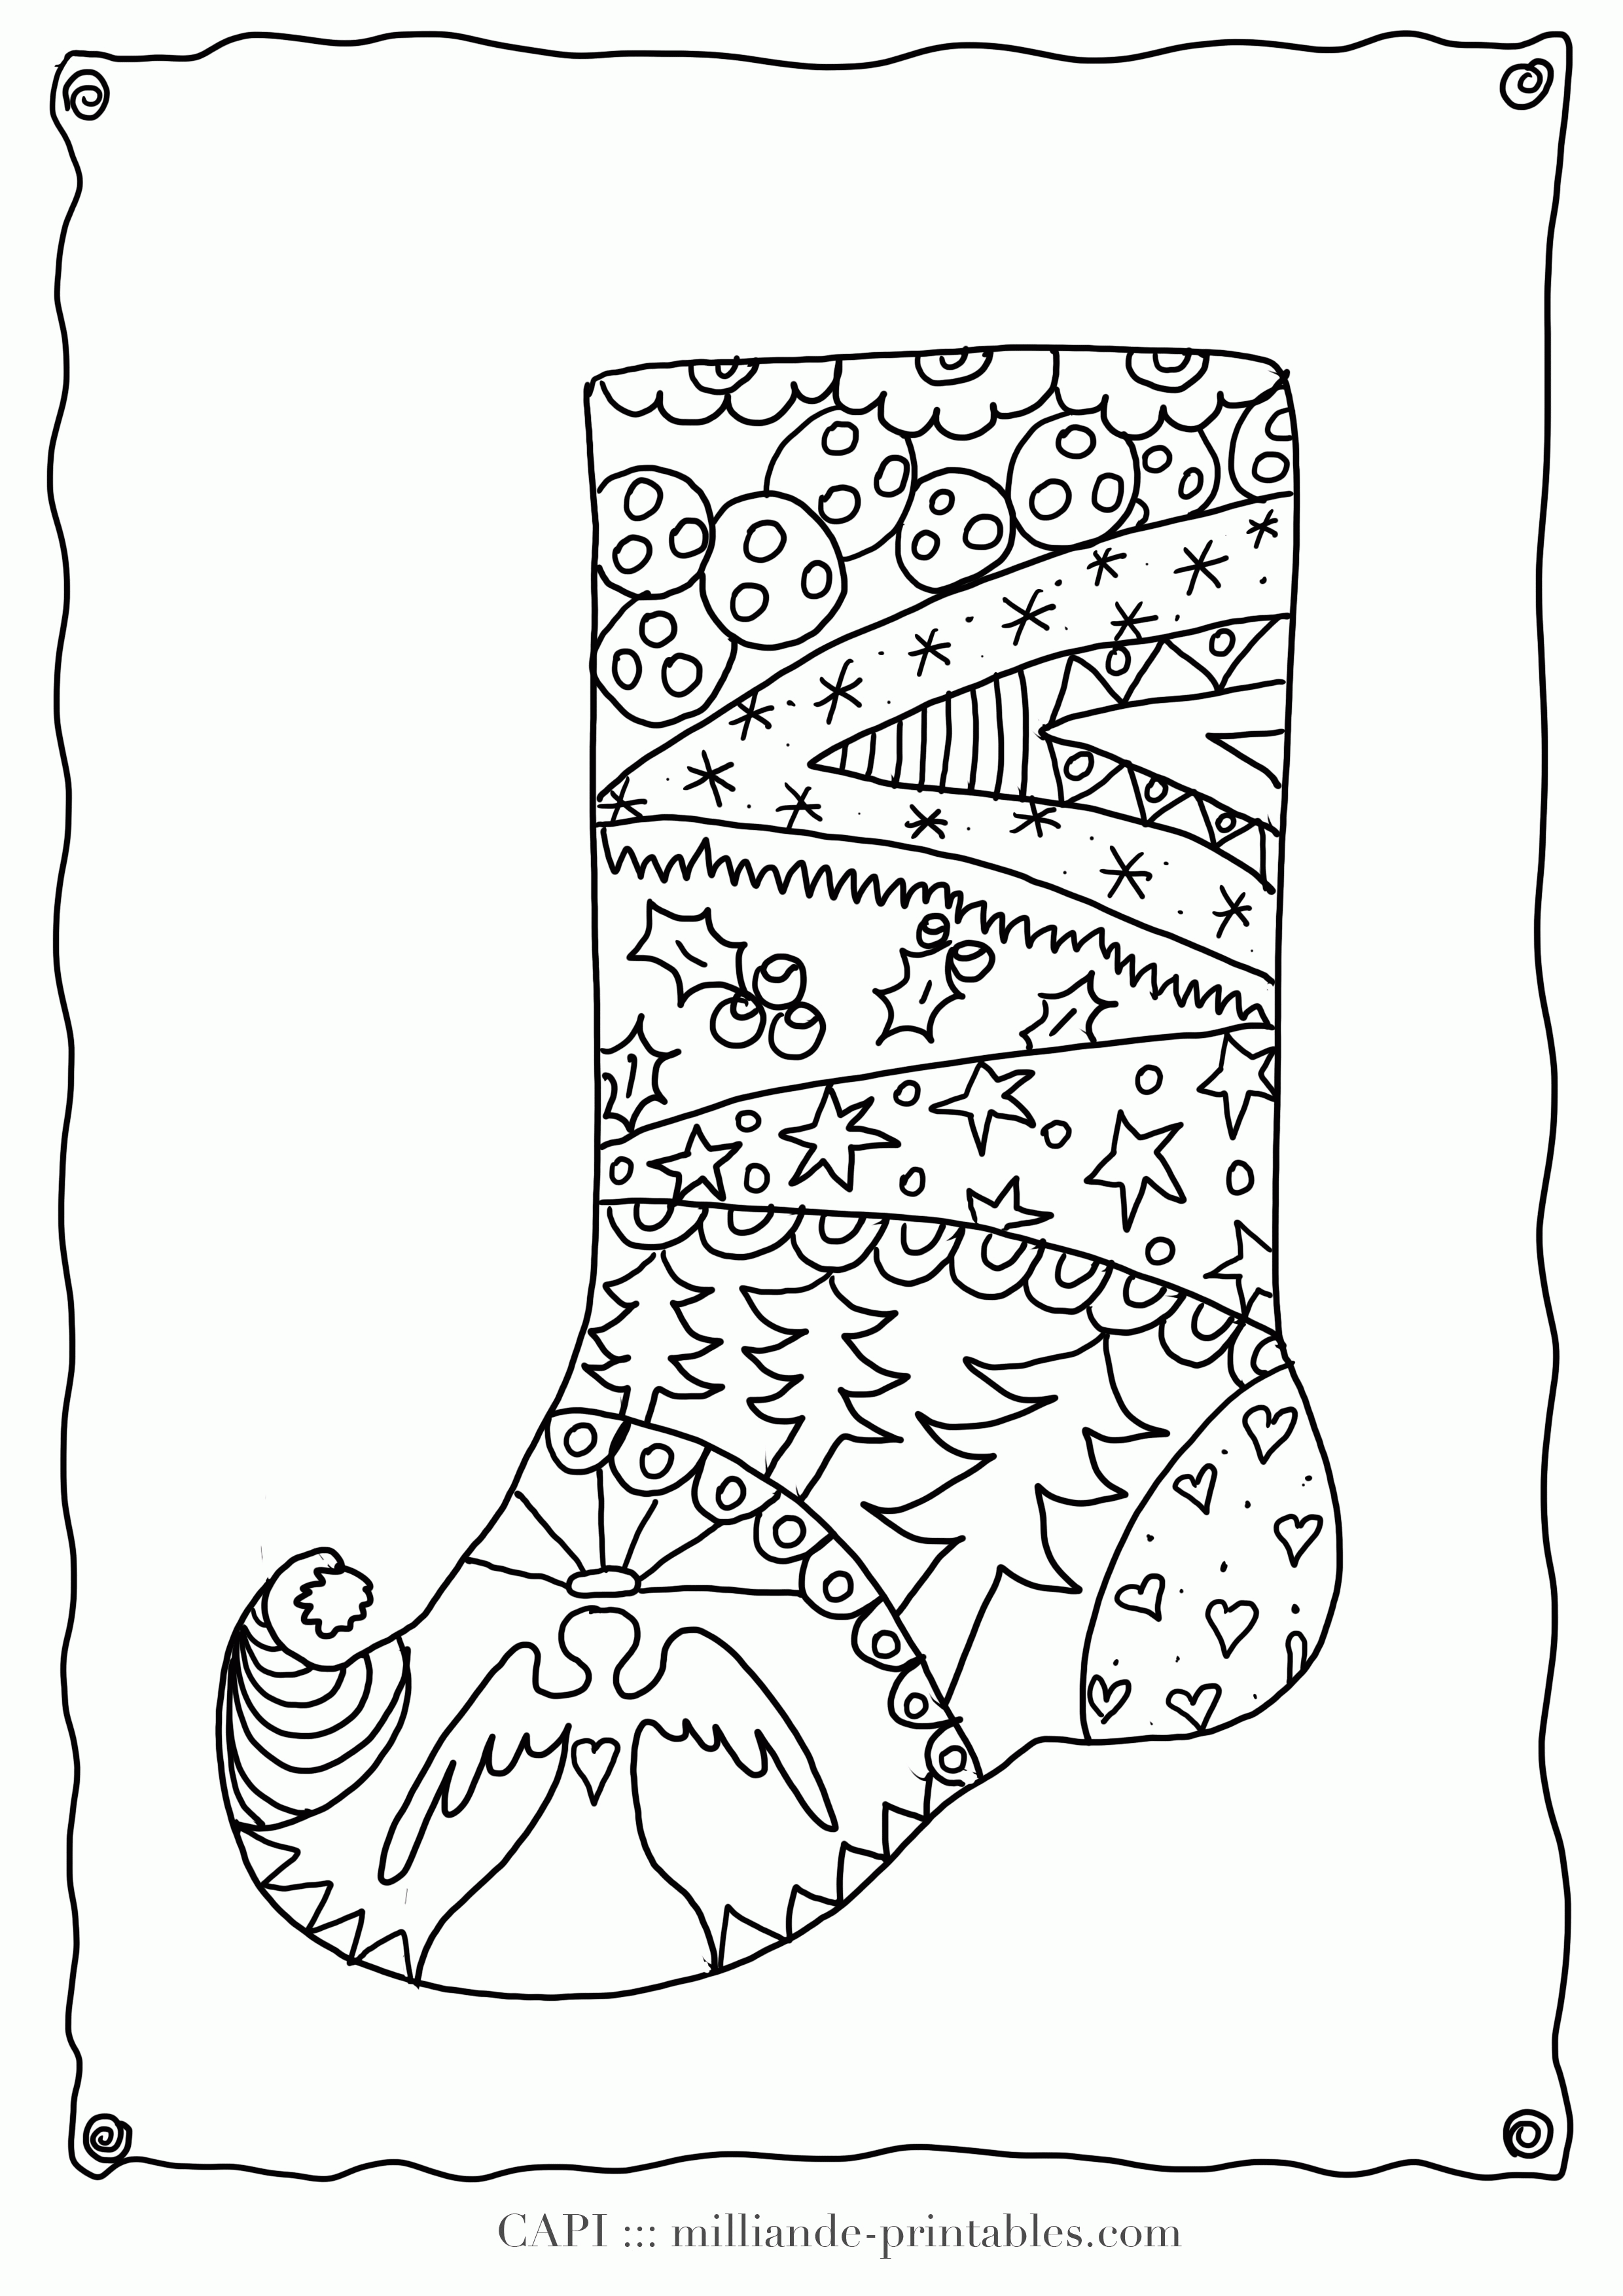 10 Pics of Free Printable Zentangle Coloring Pages - Zentangle ...